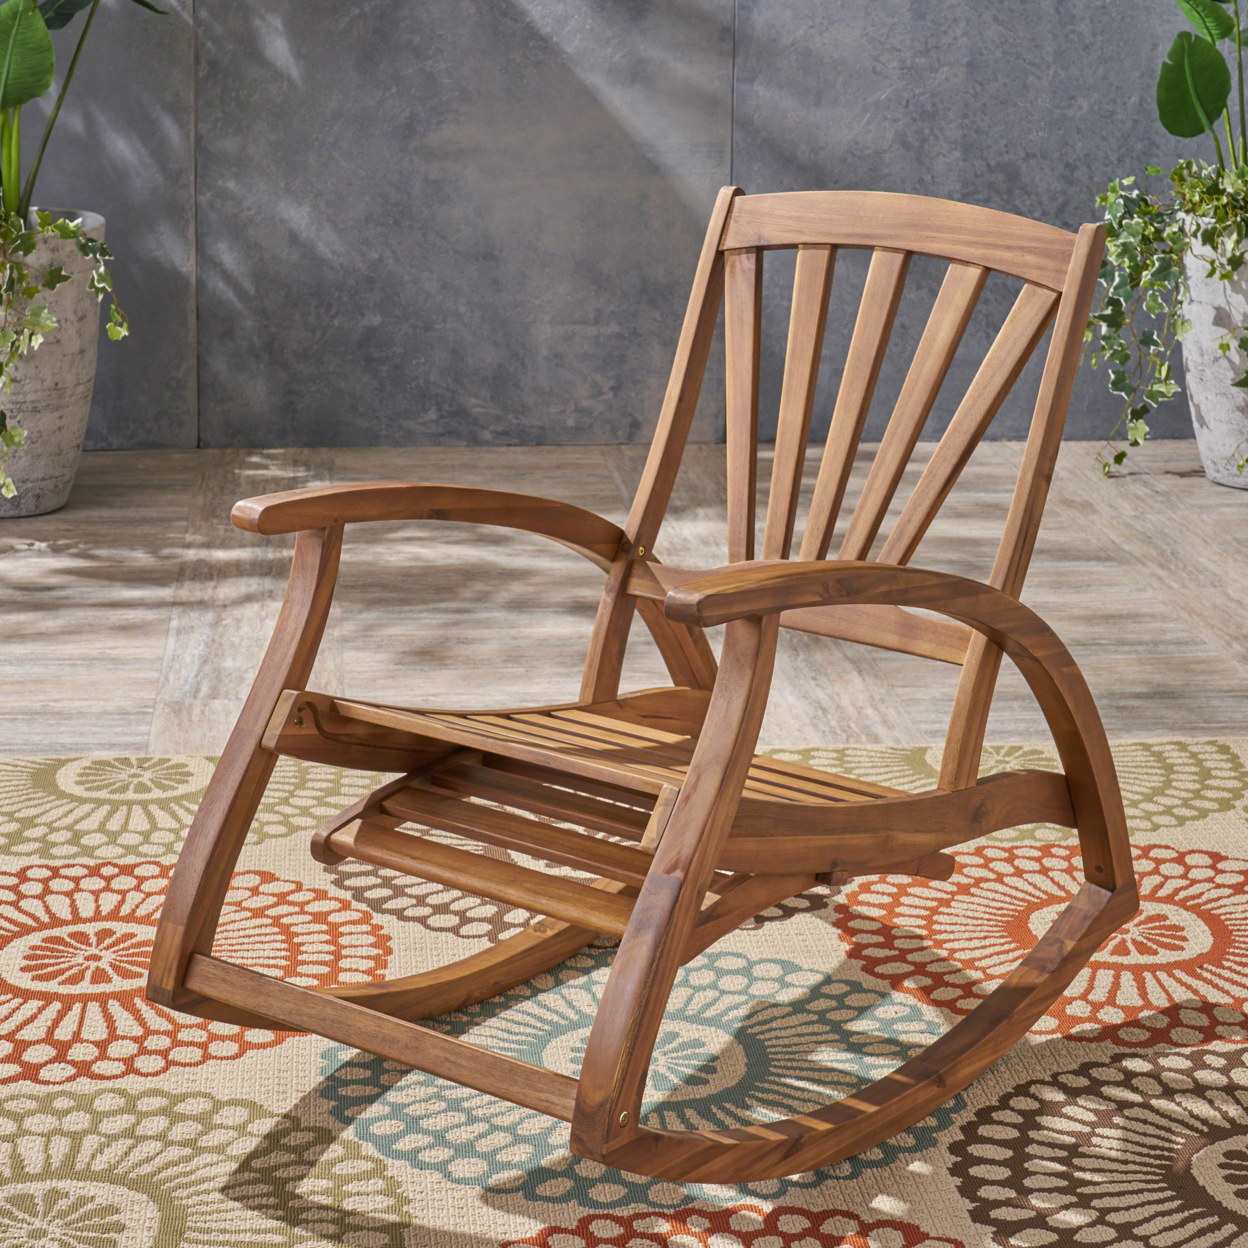 Alva Outdoor Acacia Wood Rocking Chair With Footrest - Gray Finish